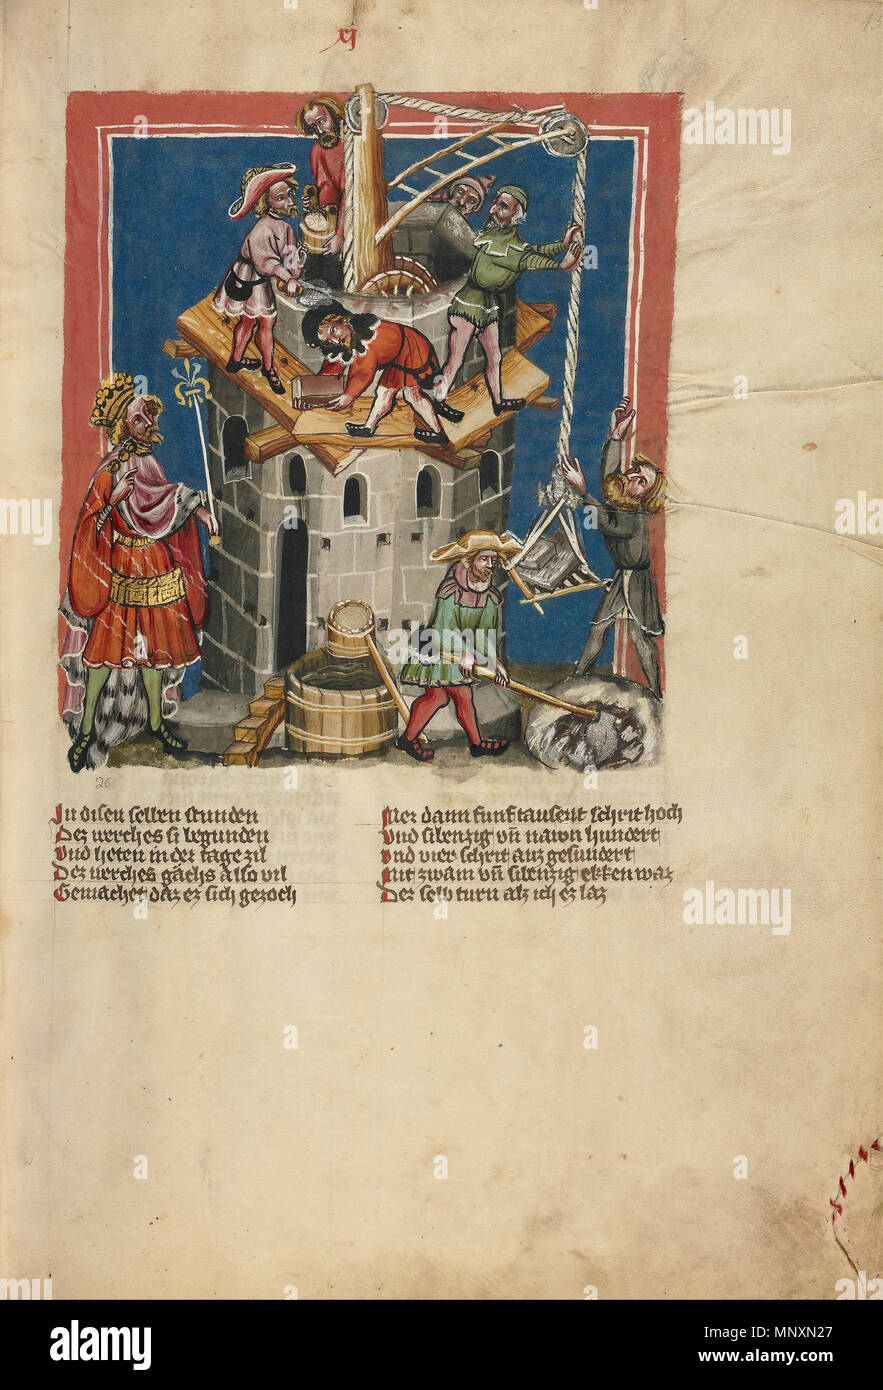 The Construction of the Tower of Babel .  A miniature showing the building of the Tower of Babel accompanies Rudolf von Ems's retelling of the Old Testament story. The dapperly dressed King Nimrod, at left, supervises the construction of the tower by workers. The building procedures probably mirror medieval practices closely. The laborers stand on wooden scaffolding with beams inserted into the walls through put holes. Two rows of put holes are visible below the windows, showing earlier stages of the scaffolding. The workers also hoist bricks and stone to the upper levels using a pulley system Stock Photo